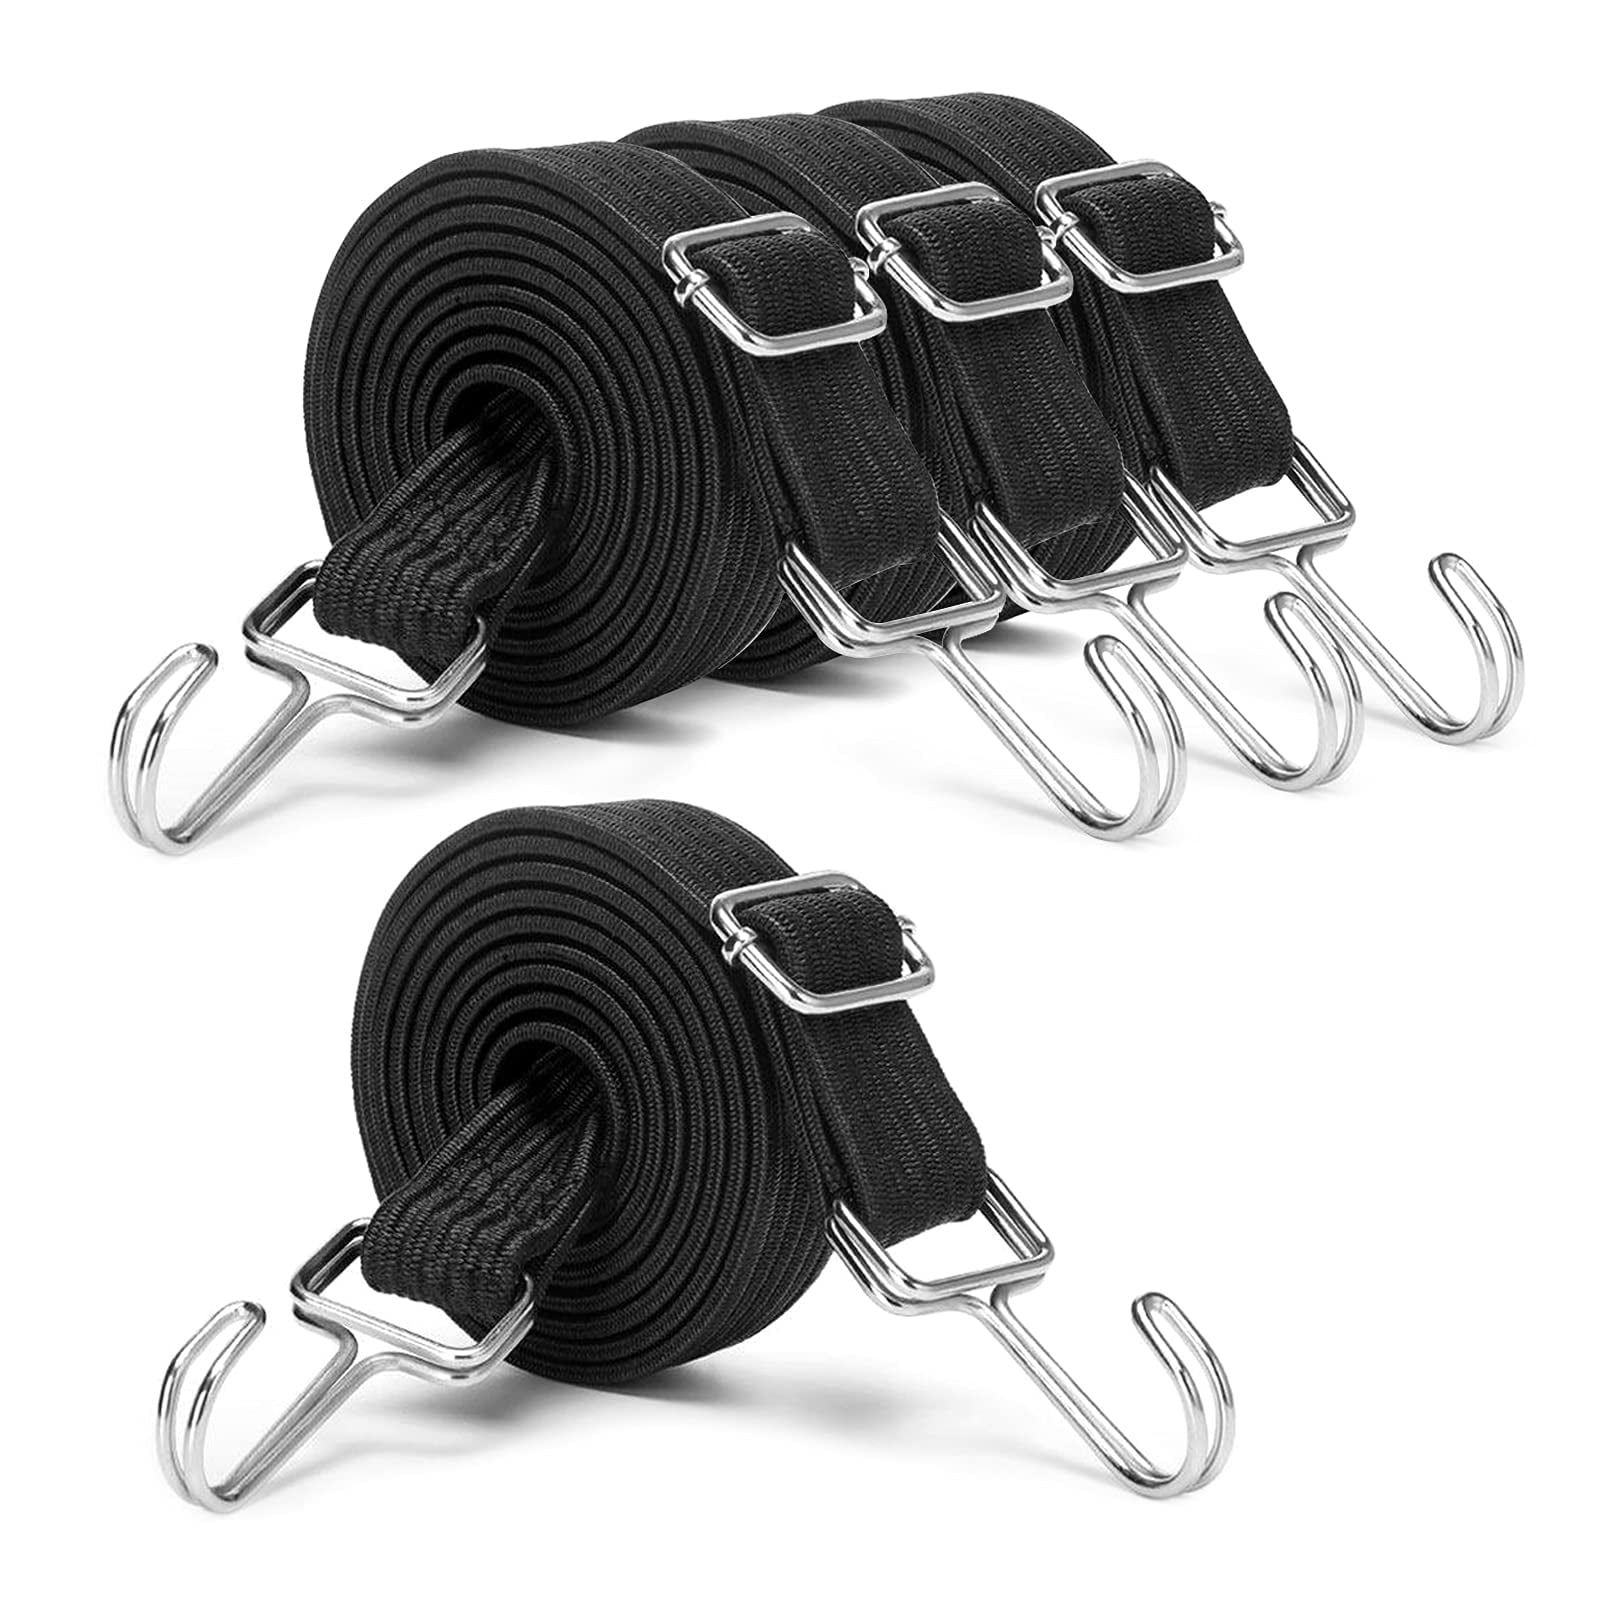 Trucking Bundle - Bulk Bungee Cords with Hooks- Pack of 50